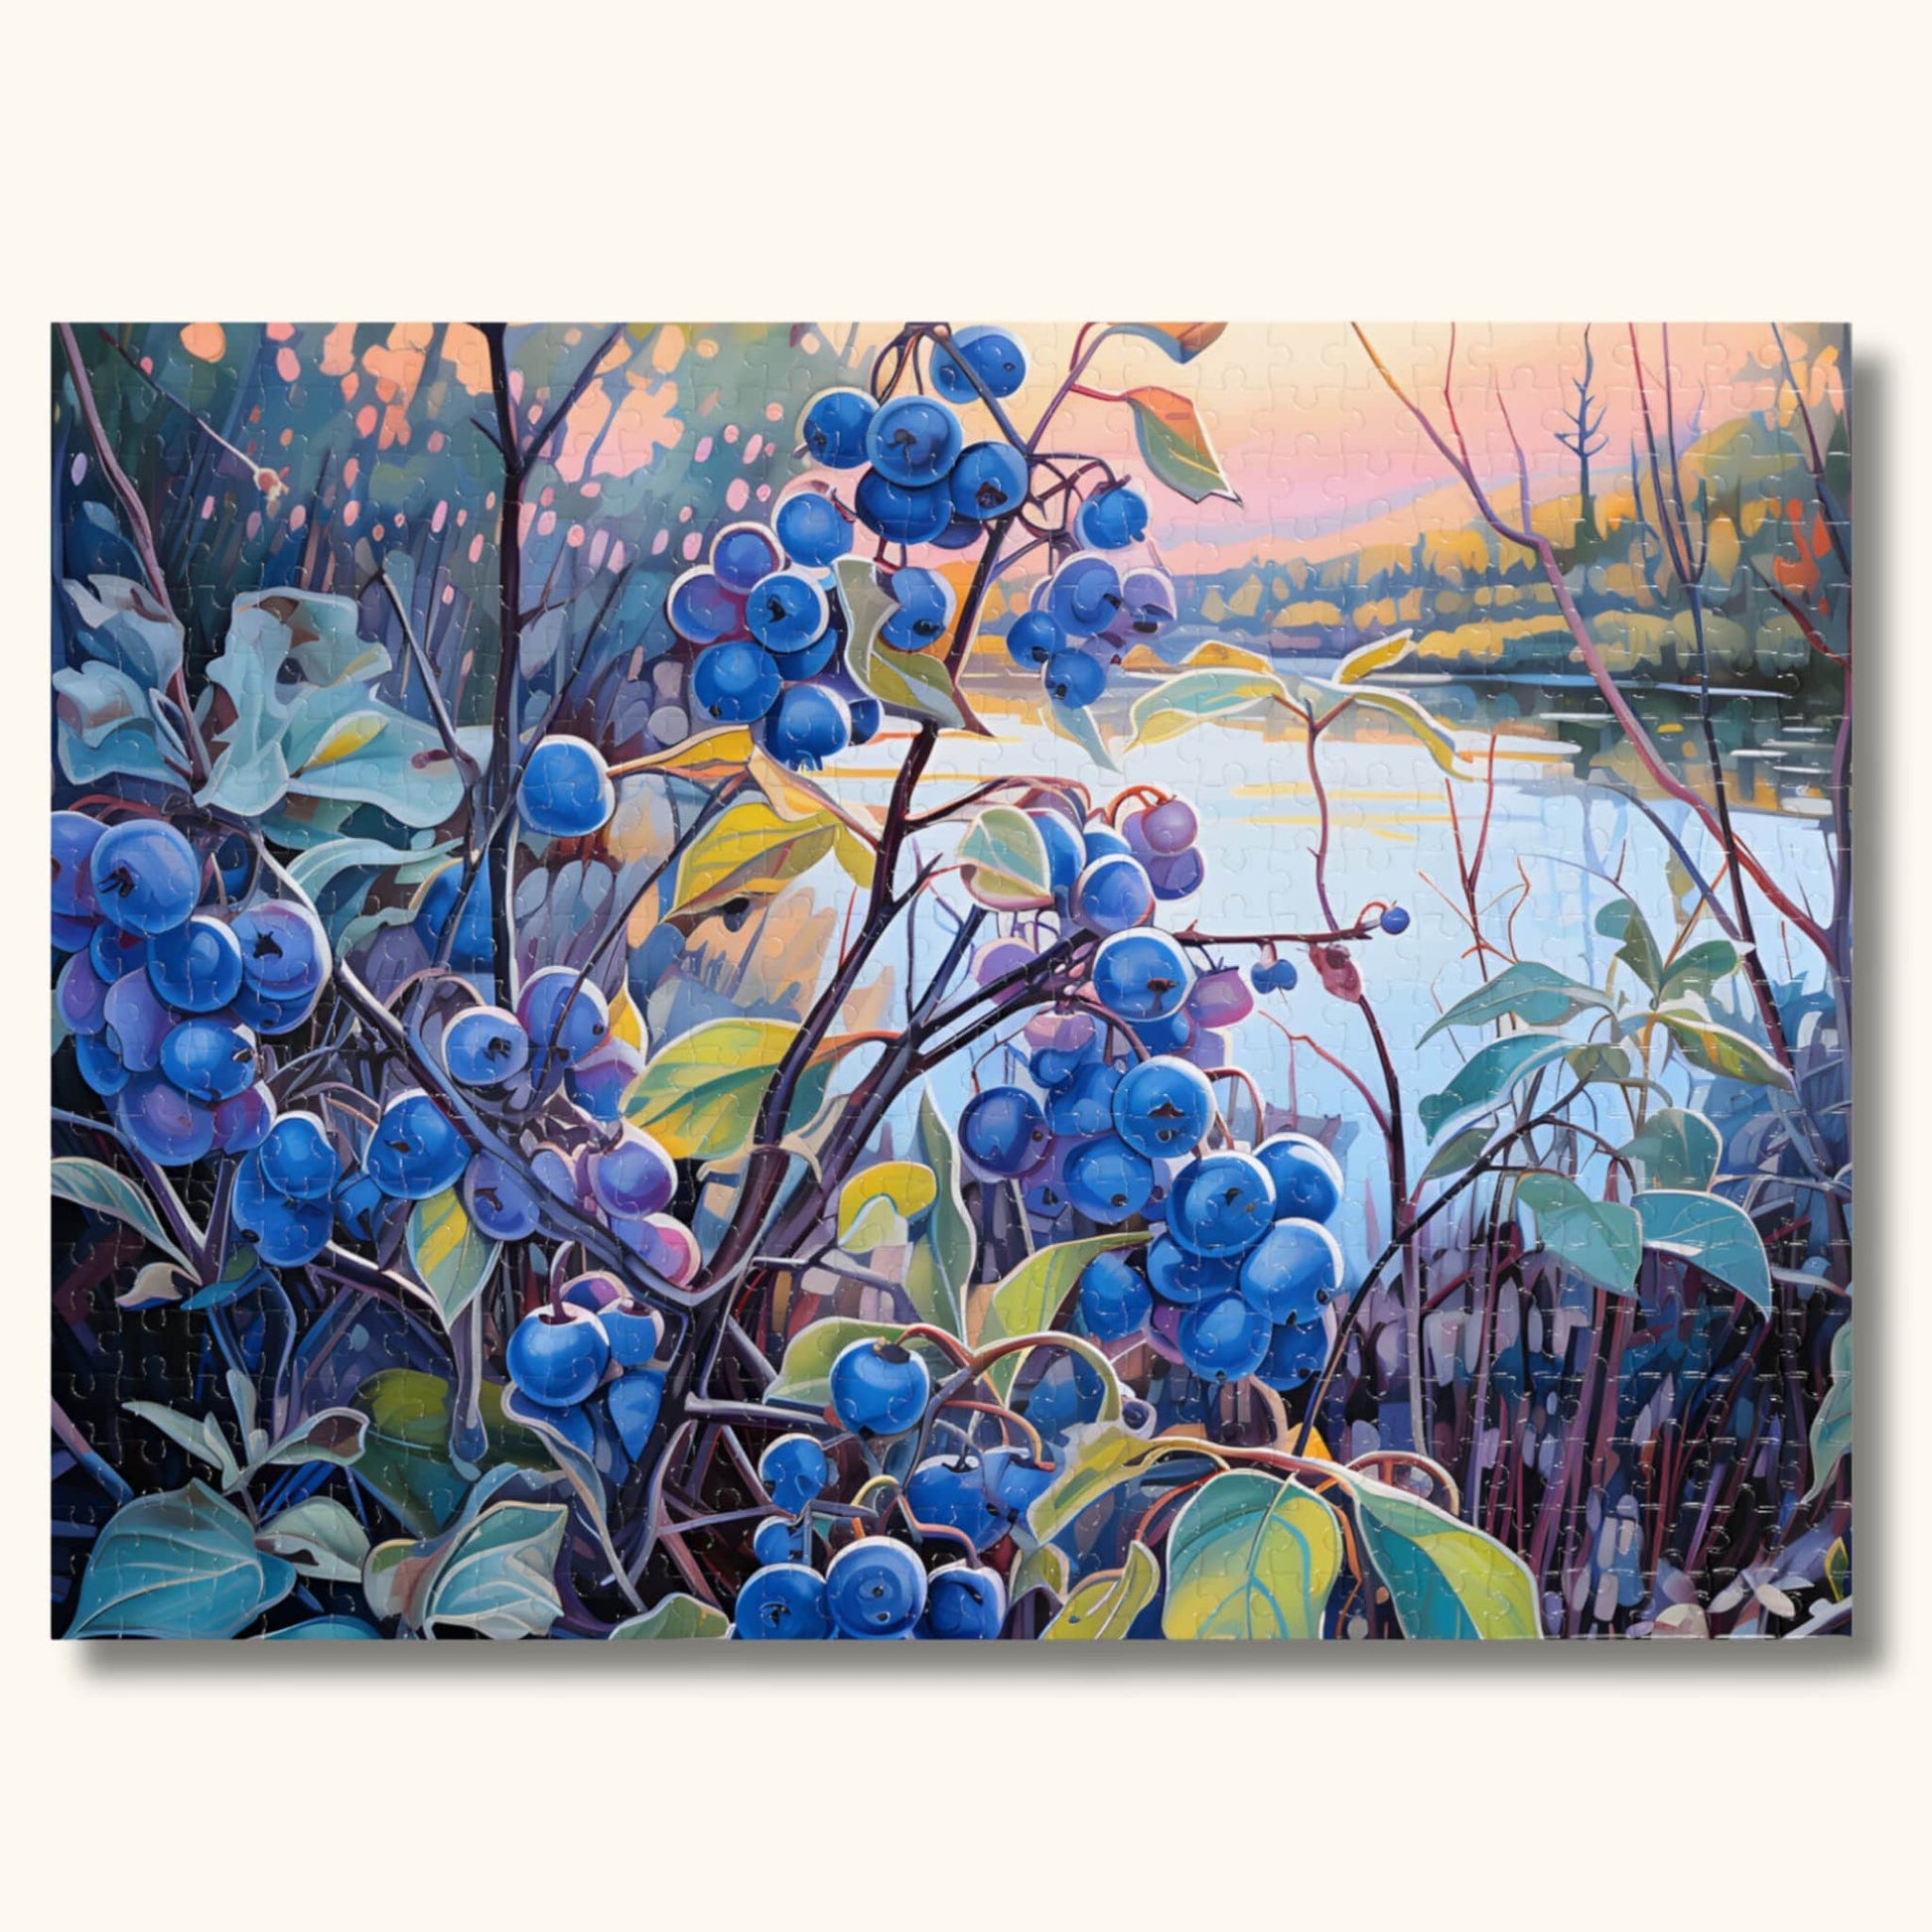 Main view of the 500-piece version of the Impressionist Blueberry Bush puzzle, perfect for a moderately challenging experience